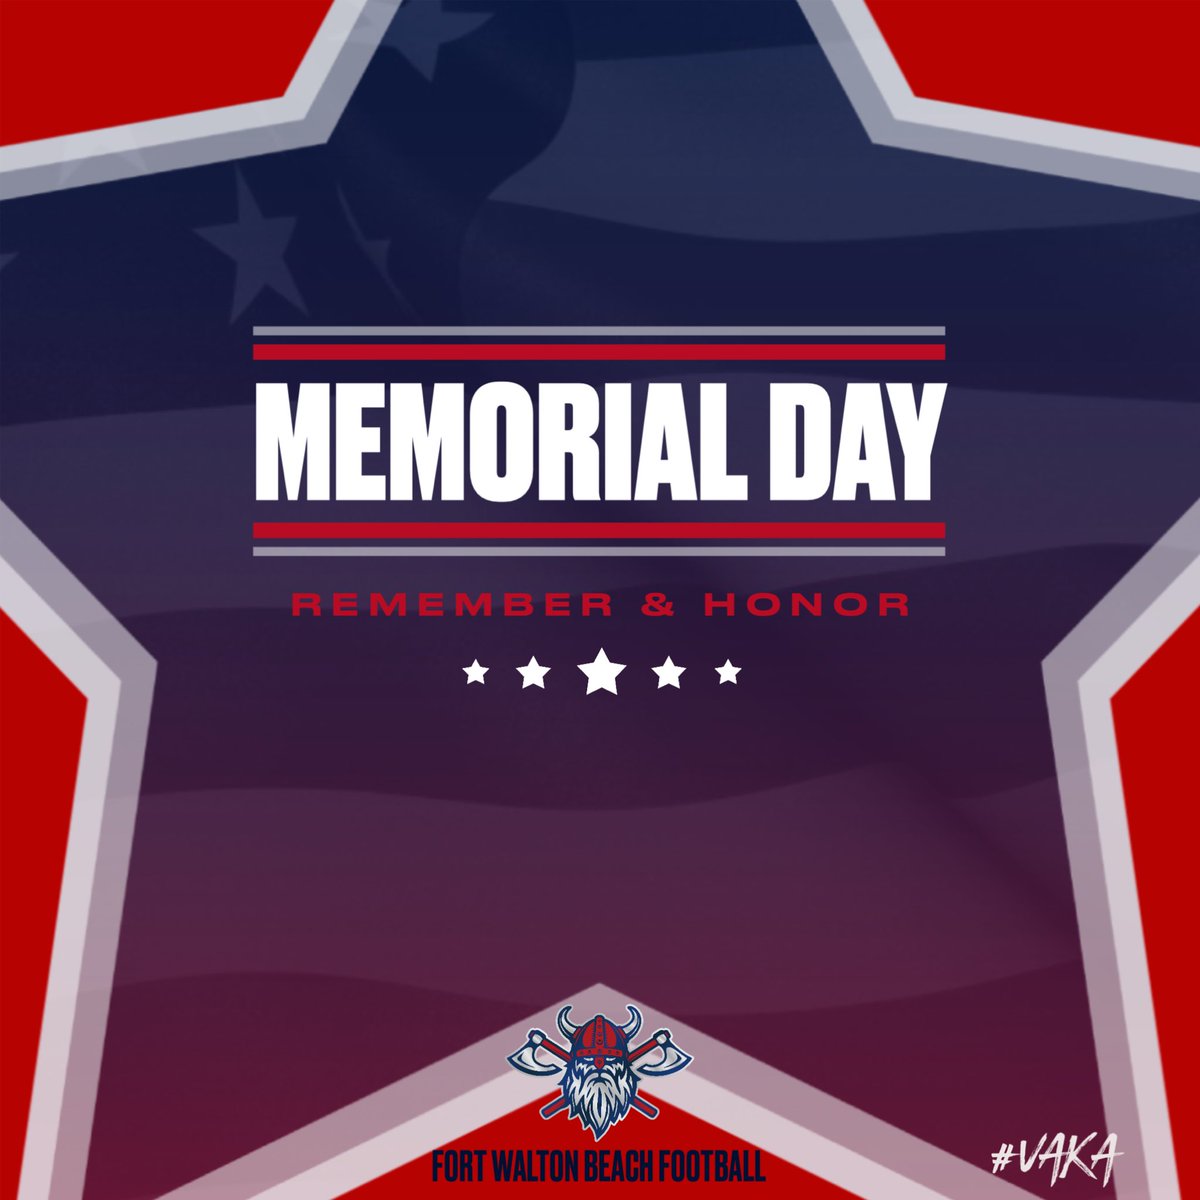 Home of the free, because of the brave. Today, we remember and honor those who paid the ultimate sacrifice in service to our country and to their families. 🇺🇸 #VAKA